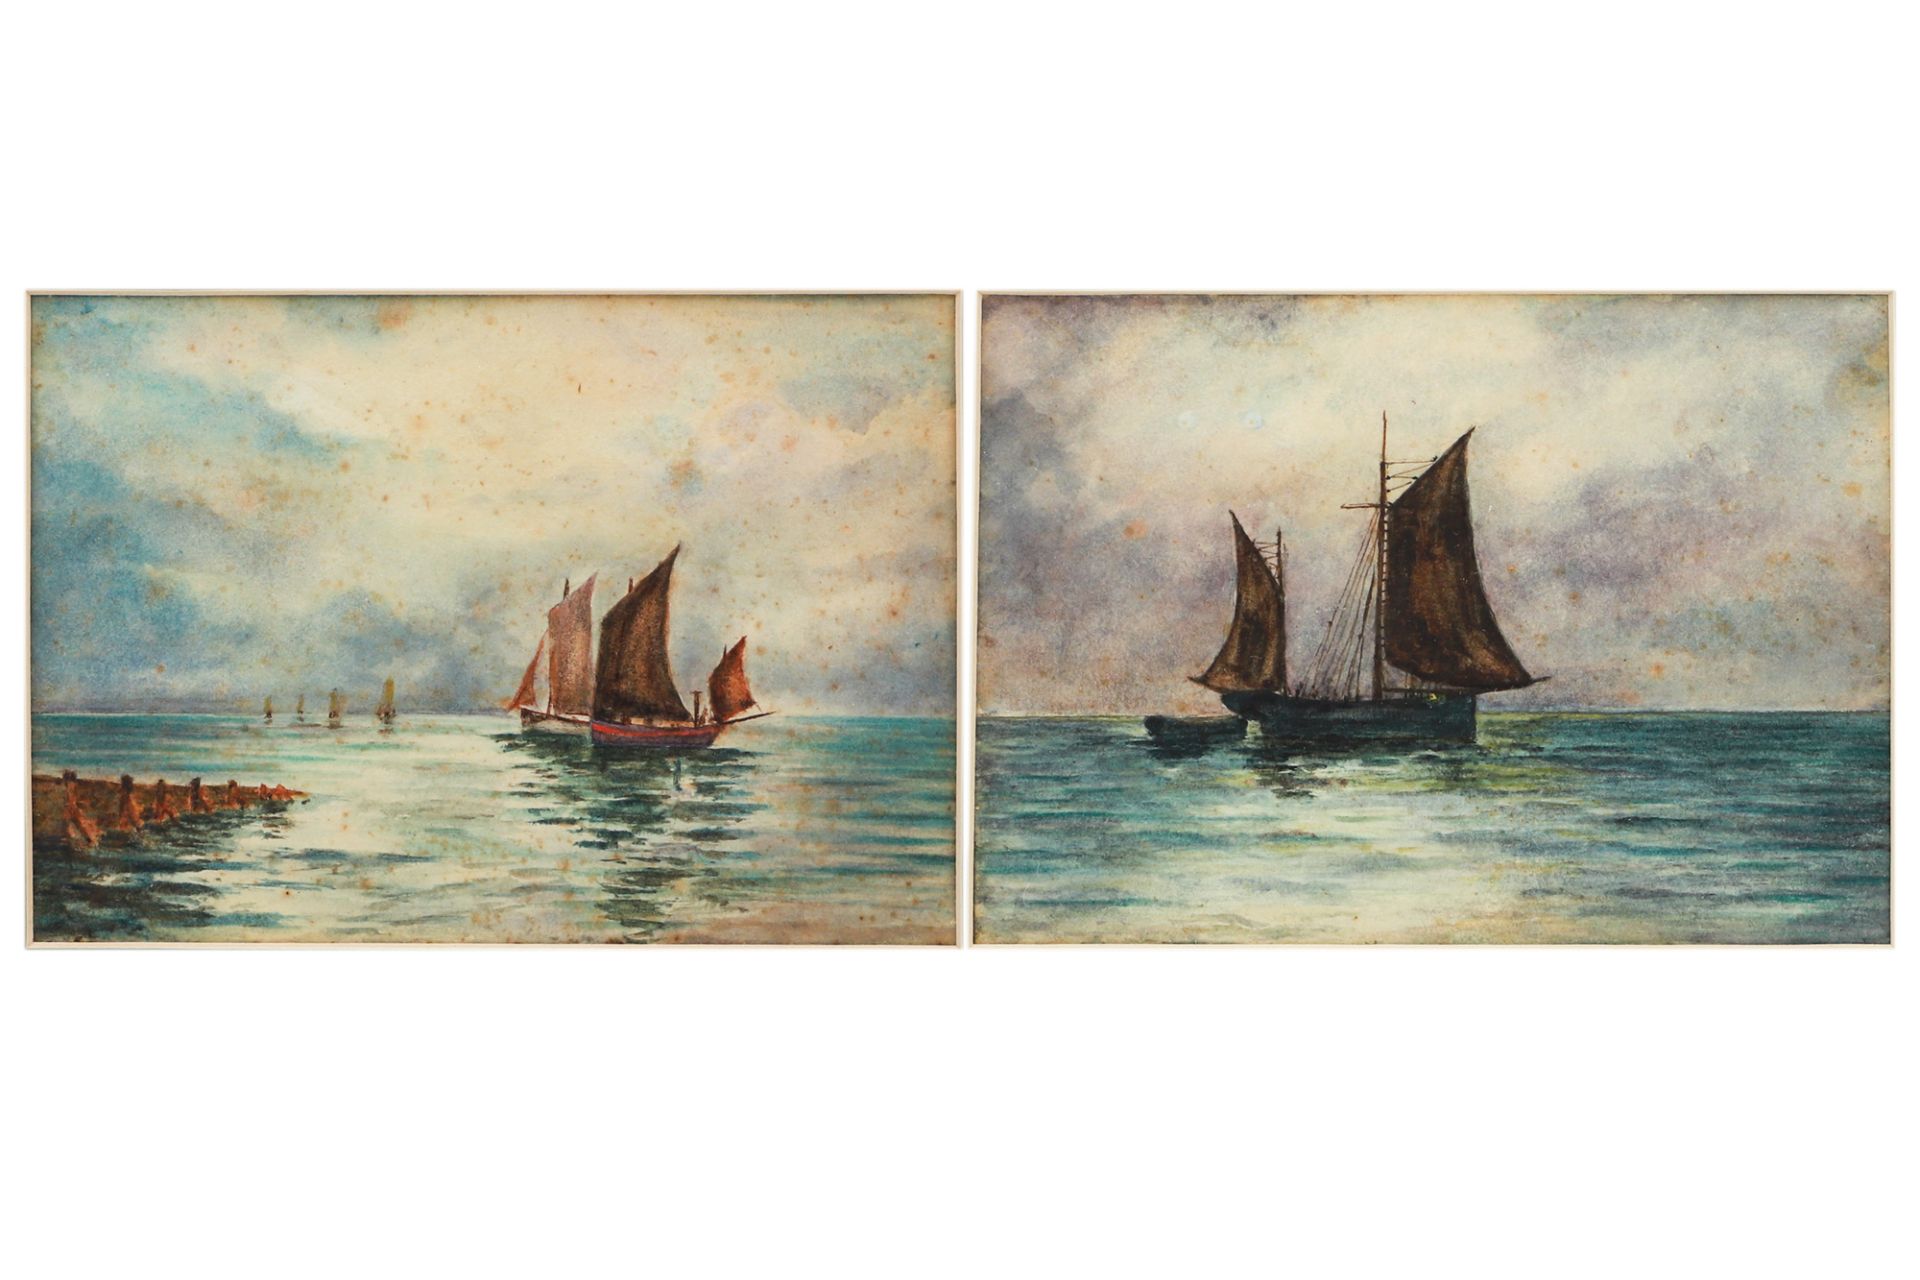 EDWARDIAN MARITIME SCHOOL, ca 1900, untitled, shipping off the coast, water colour, ca 7 × 5” (a